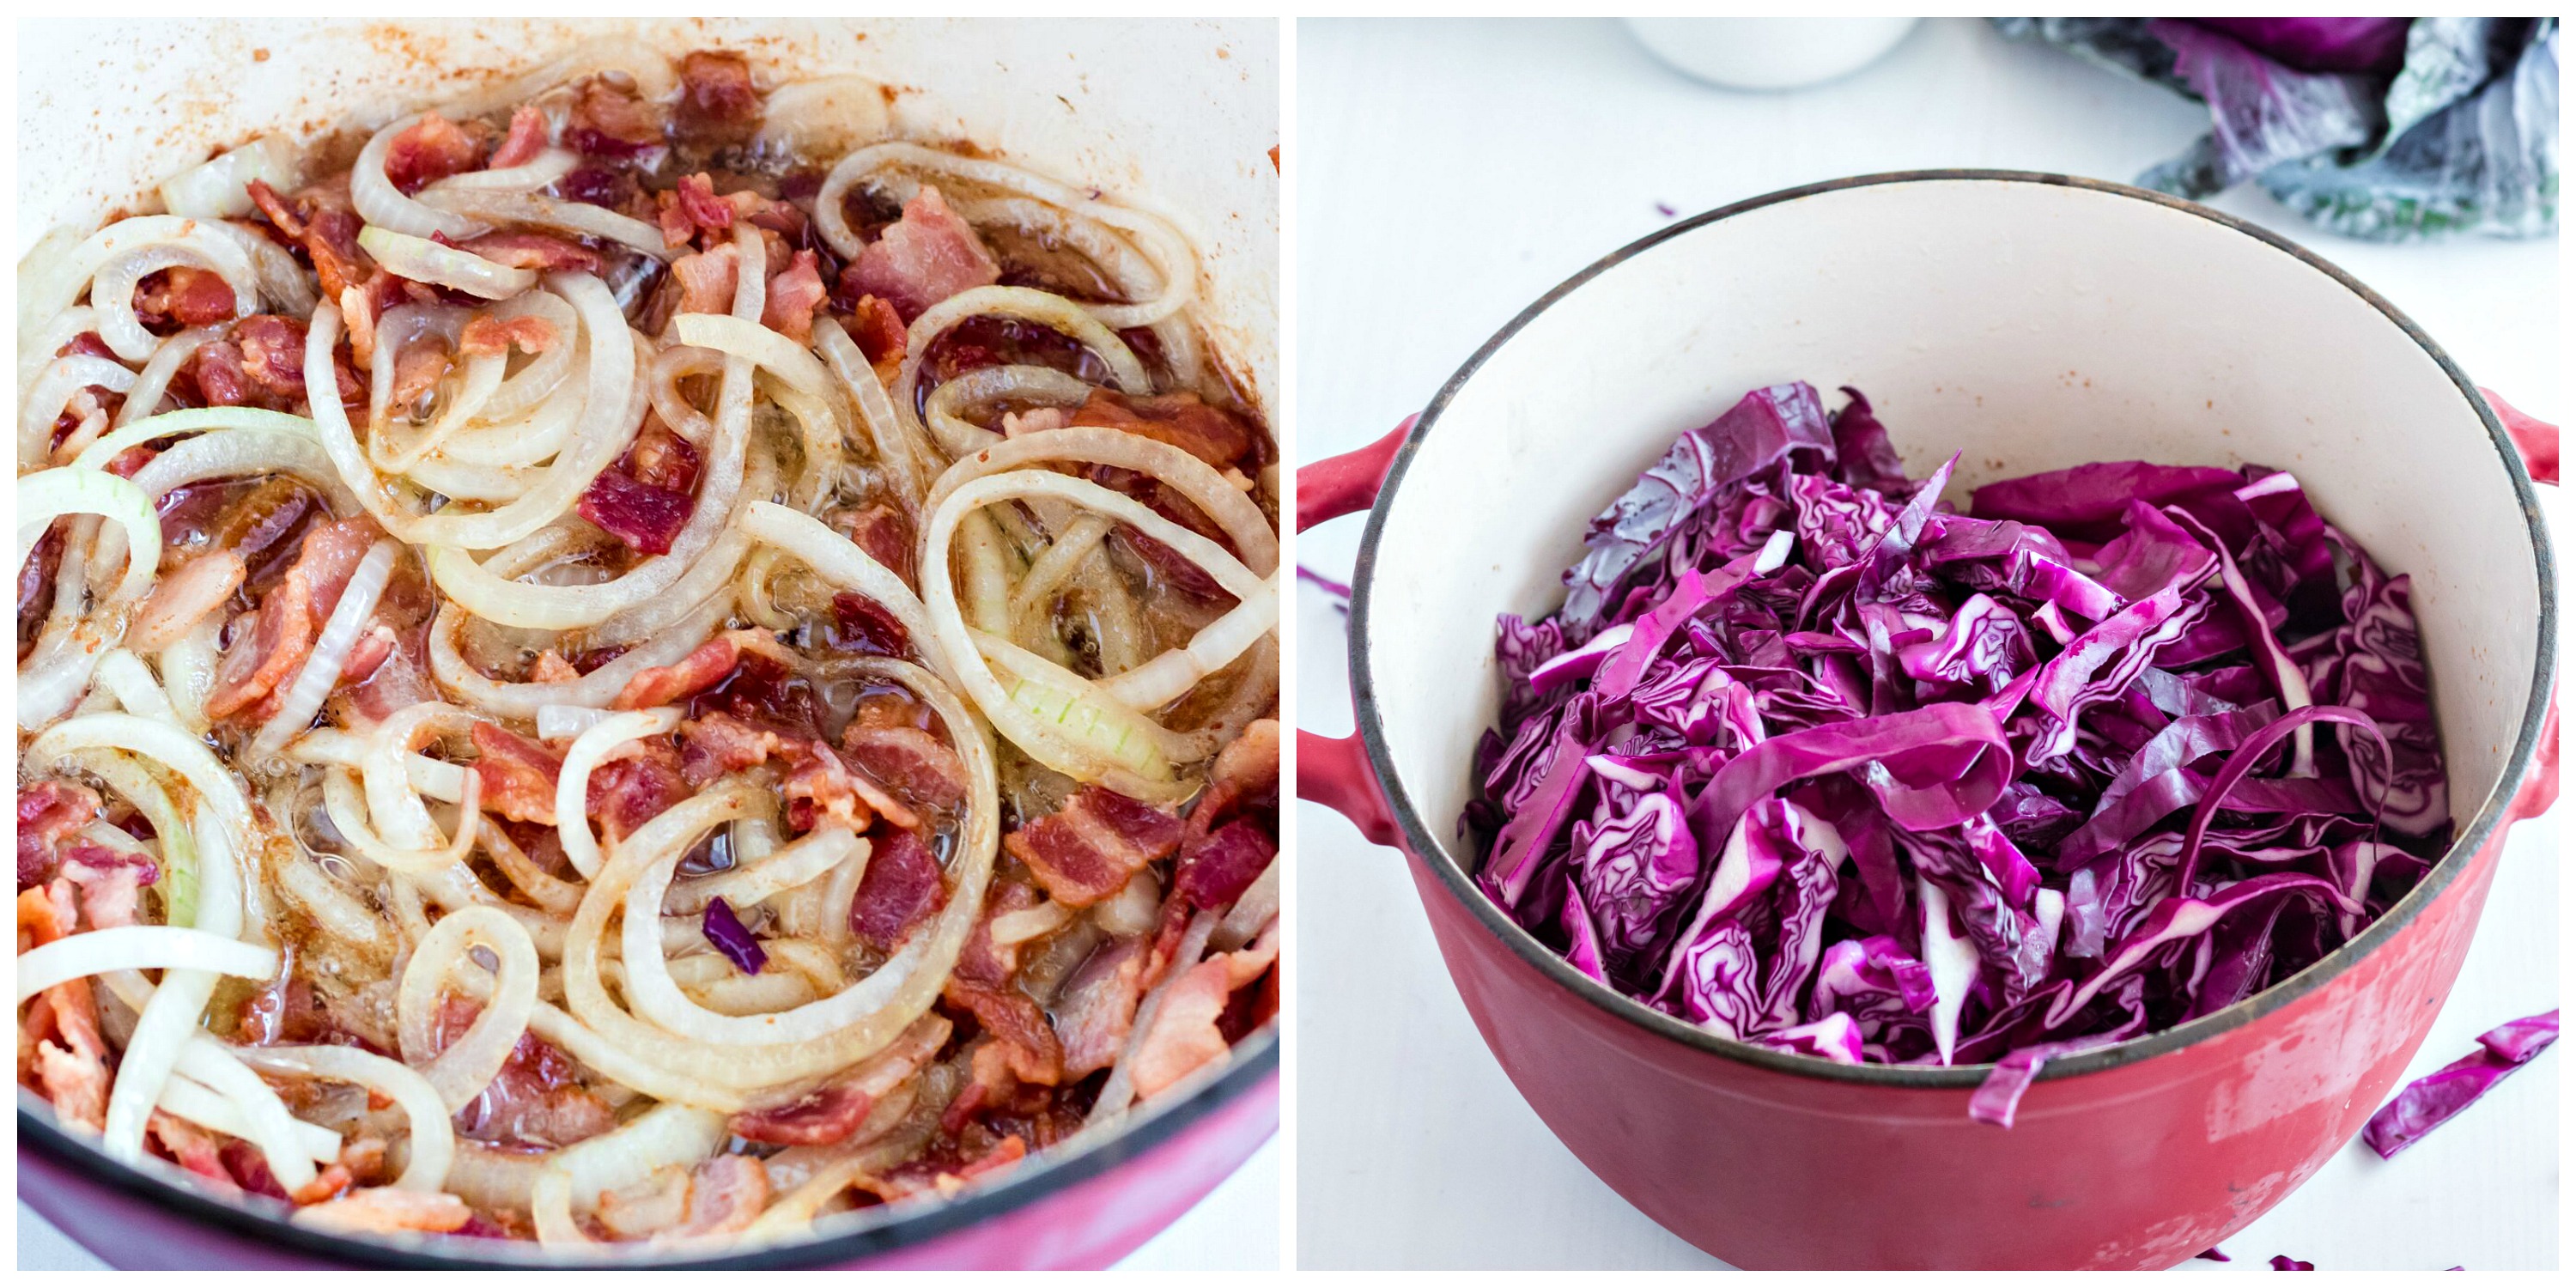 Sauteed Red cabbage